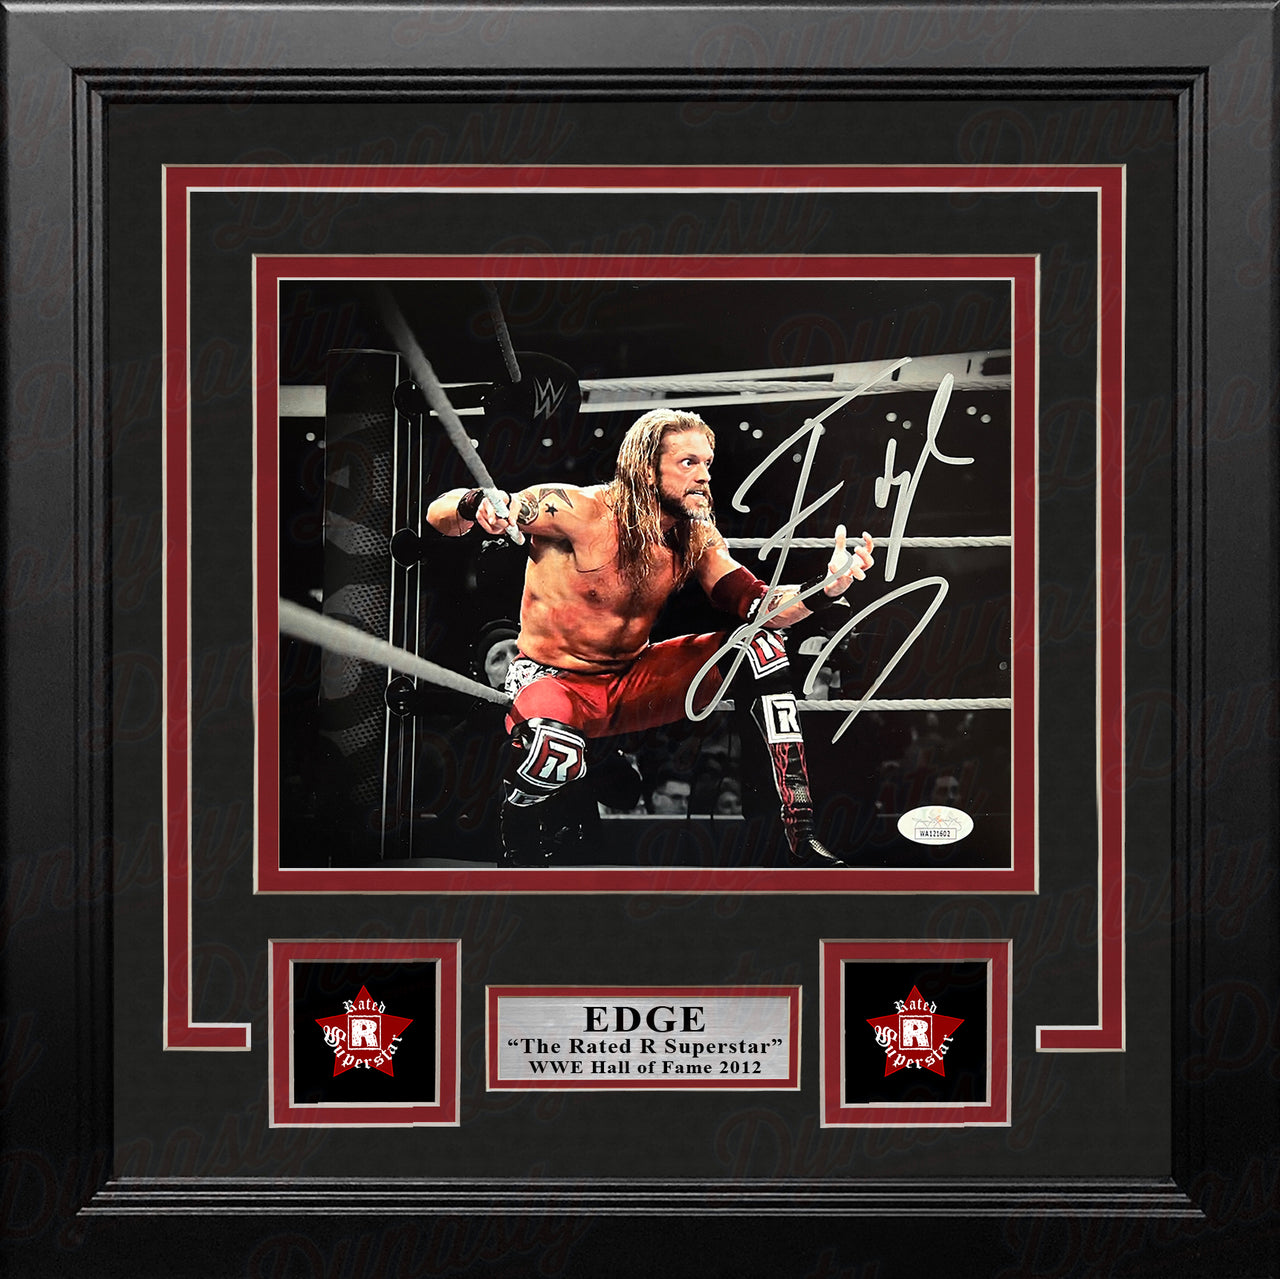 Edge Sets Up the Spear Autographed Framed WWE Wrestling Photo - Dynasty Sports & Framing 